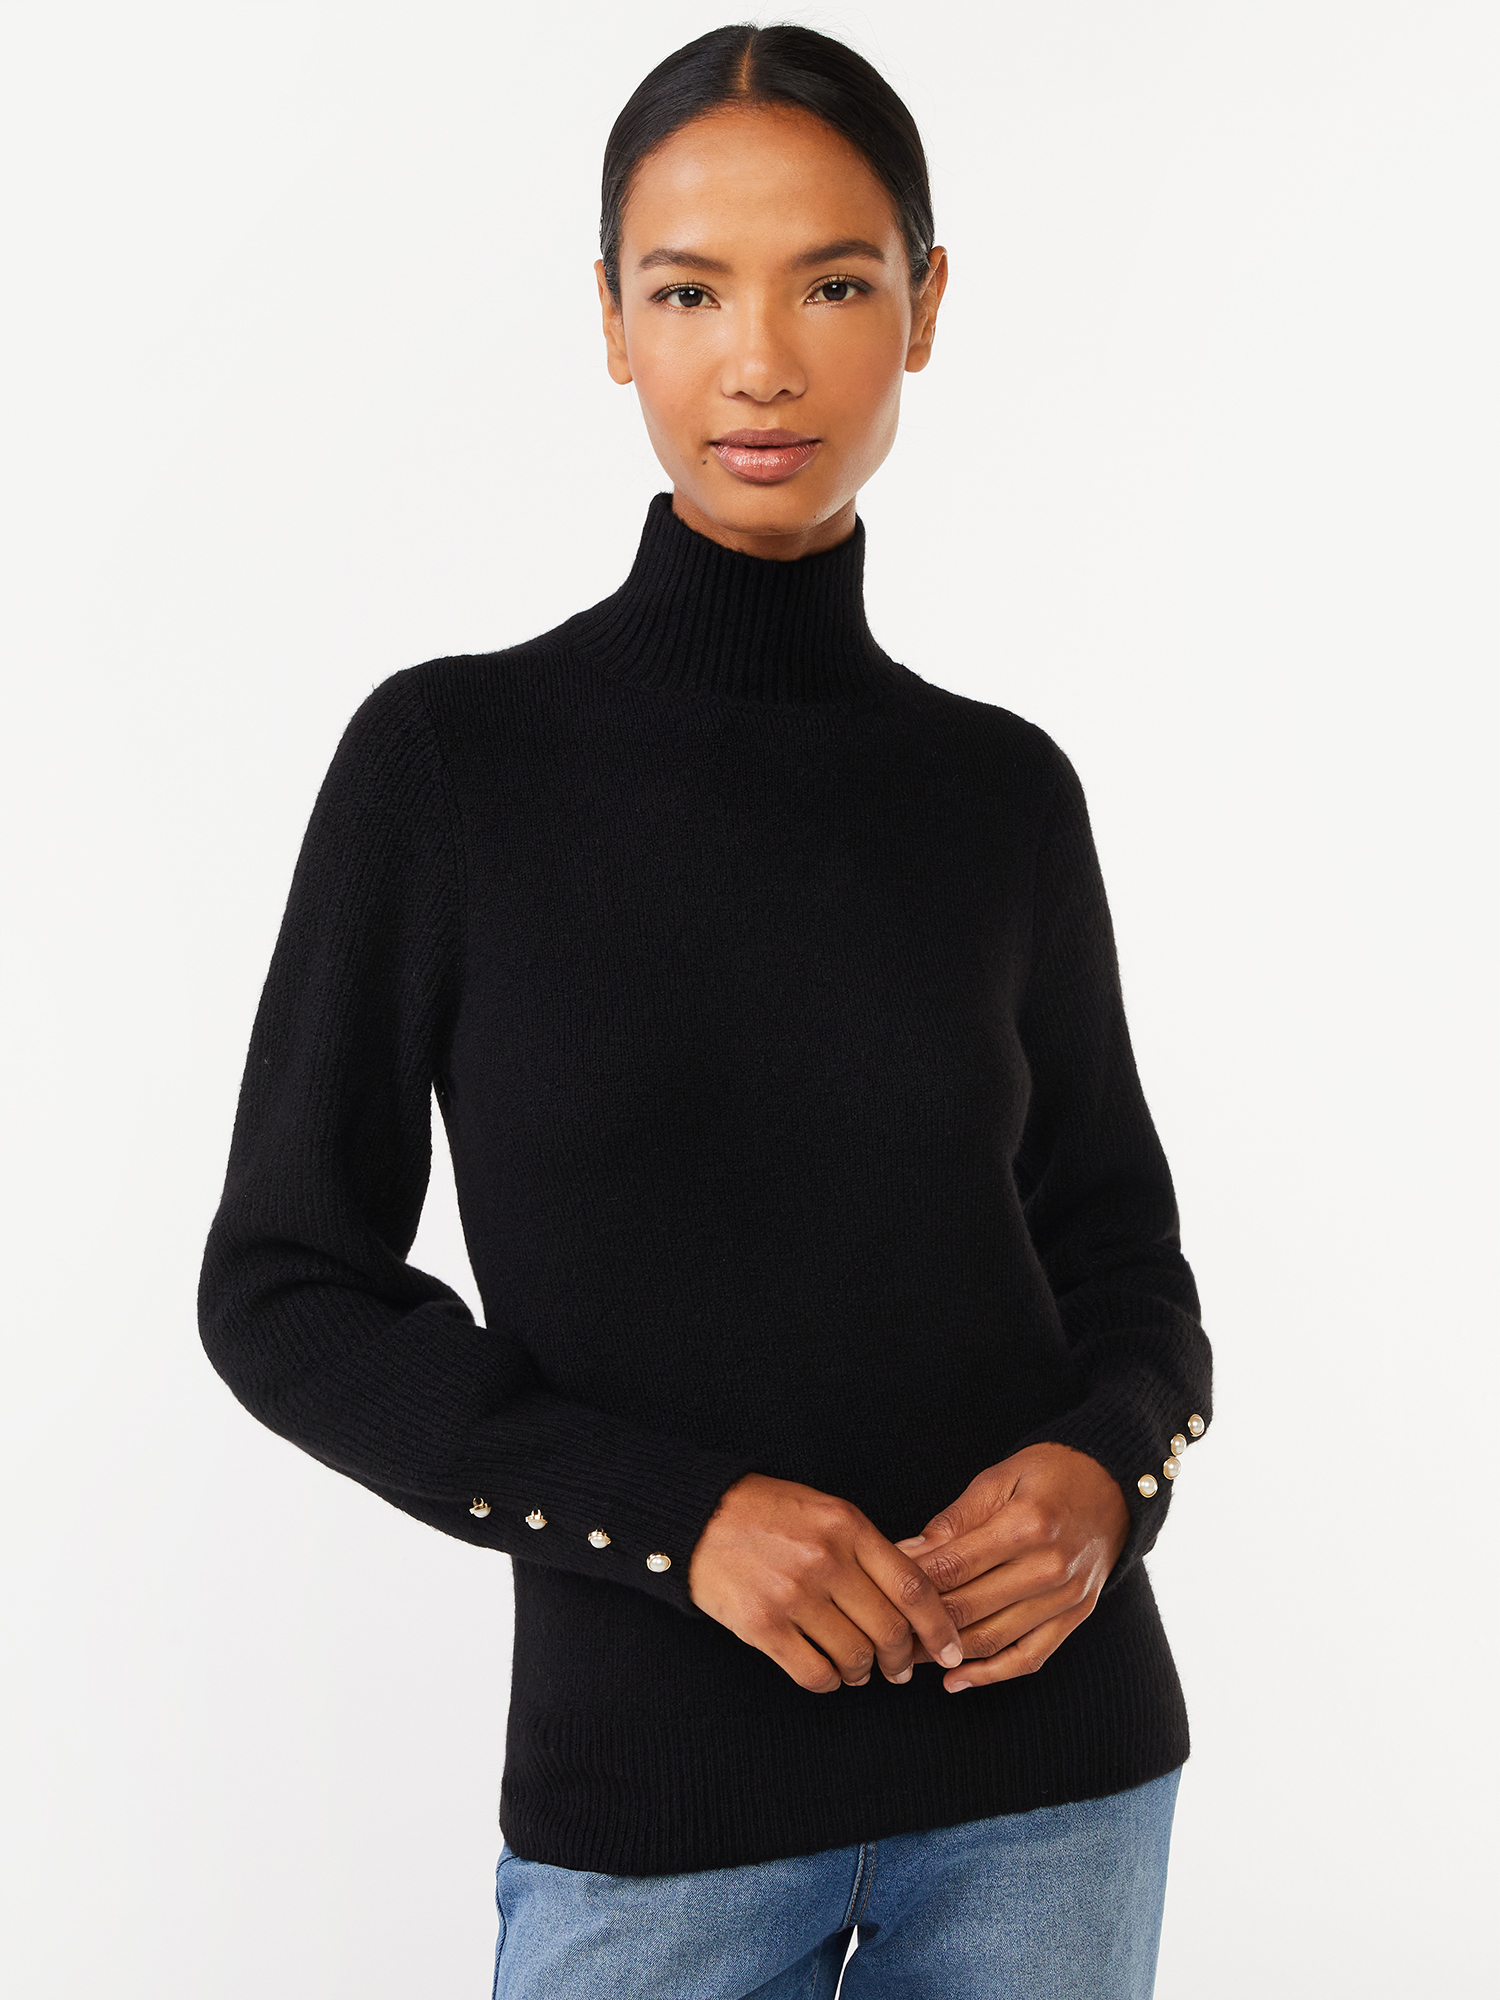 Scoop Women's Long Sleeve Turtleneck Sweater with Button Cuffs, Midweight, Sizes XS-XXL - image 1 of 5